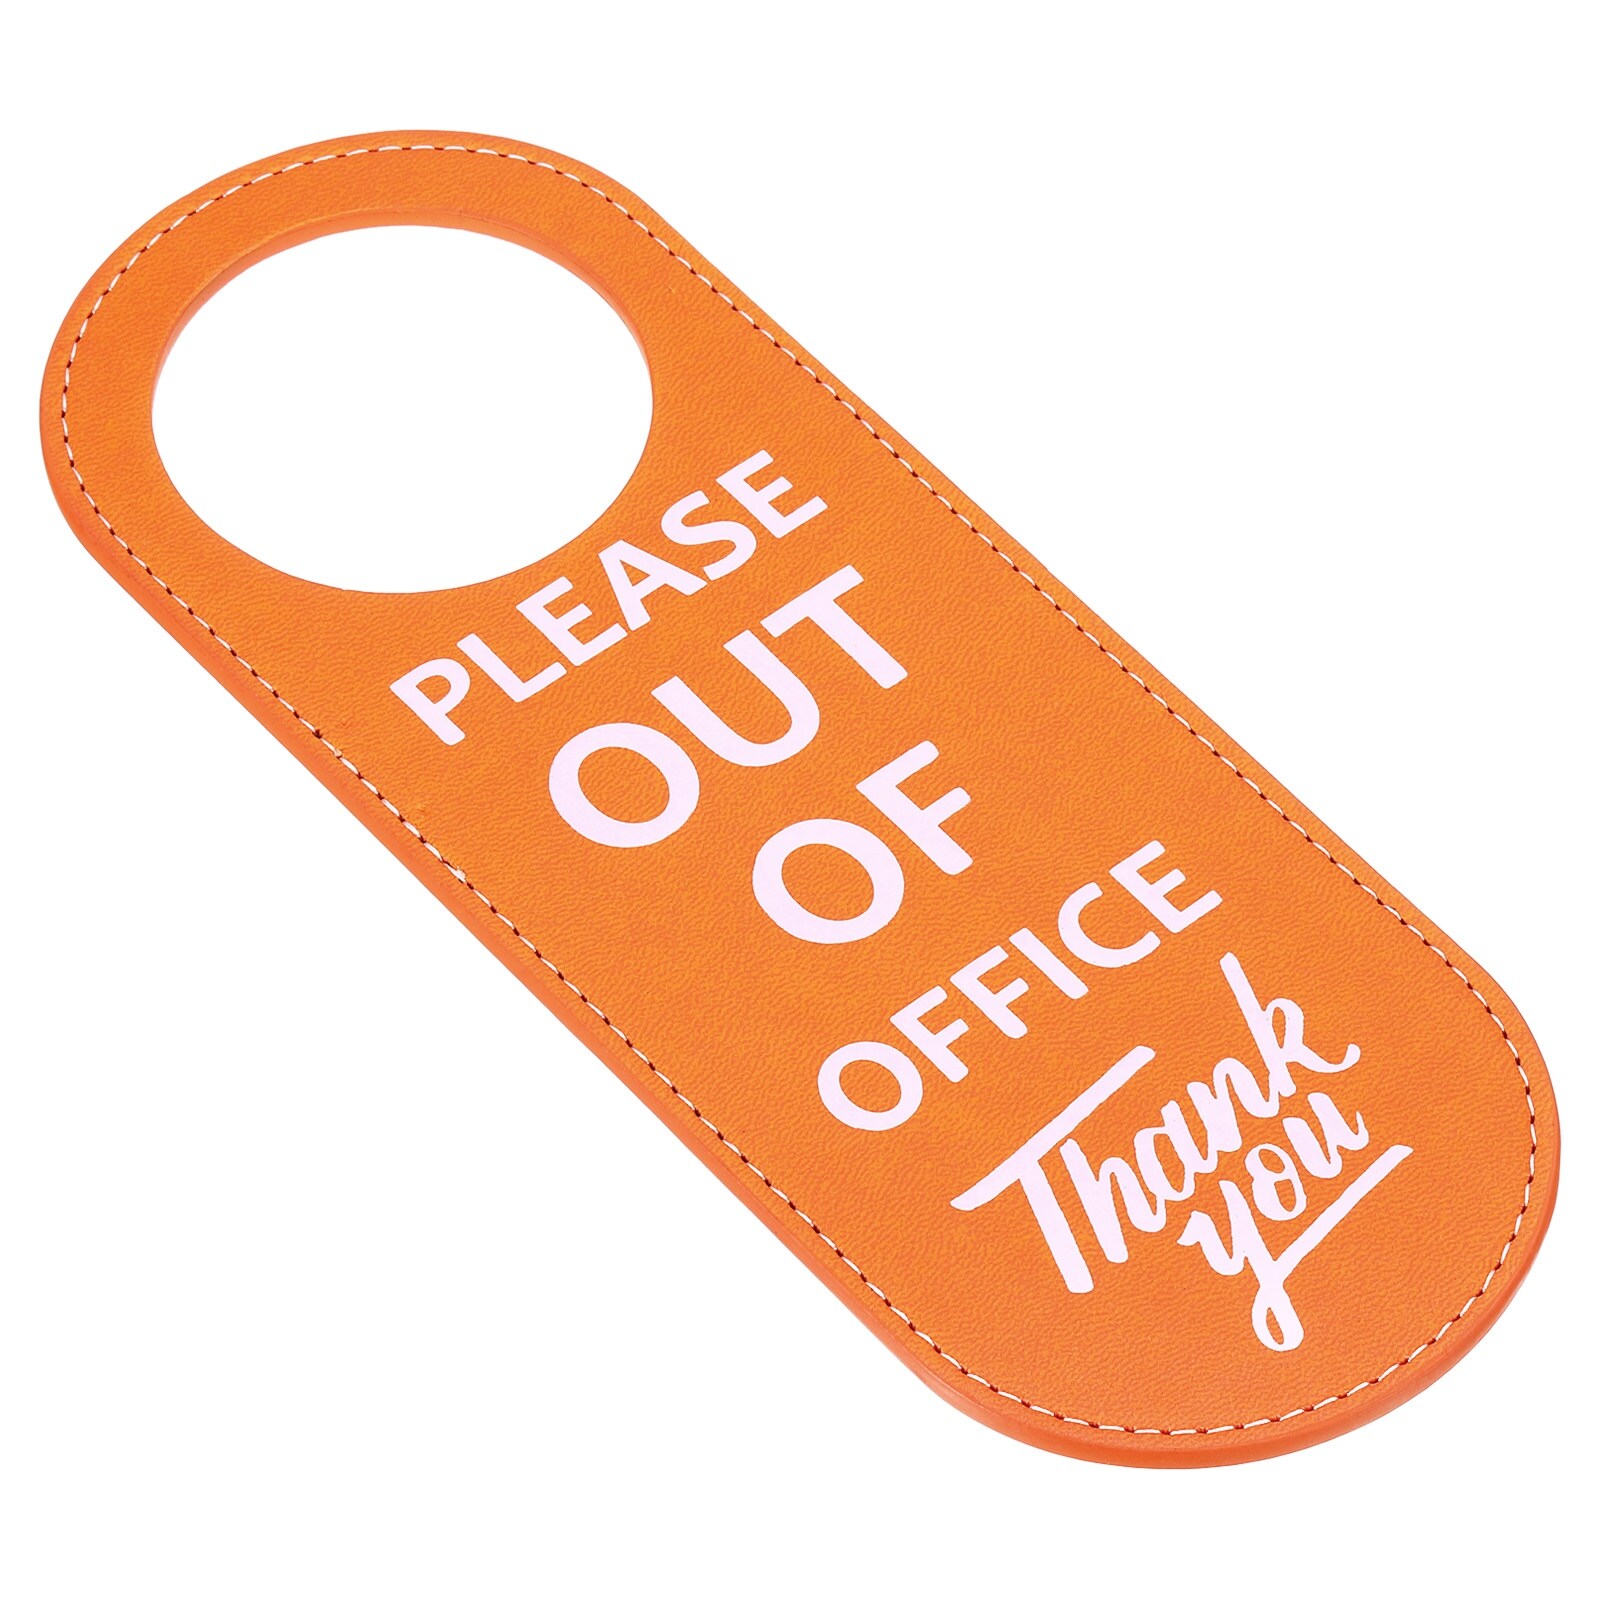  8 Options Door Hanger Sign Do not Disturb Working from Home  Office in a Meeting Away Vacation Out of Office Back Soon : Office Products